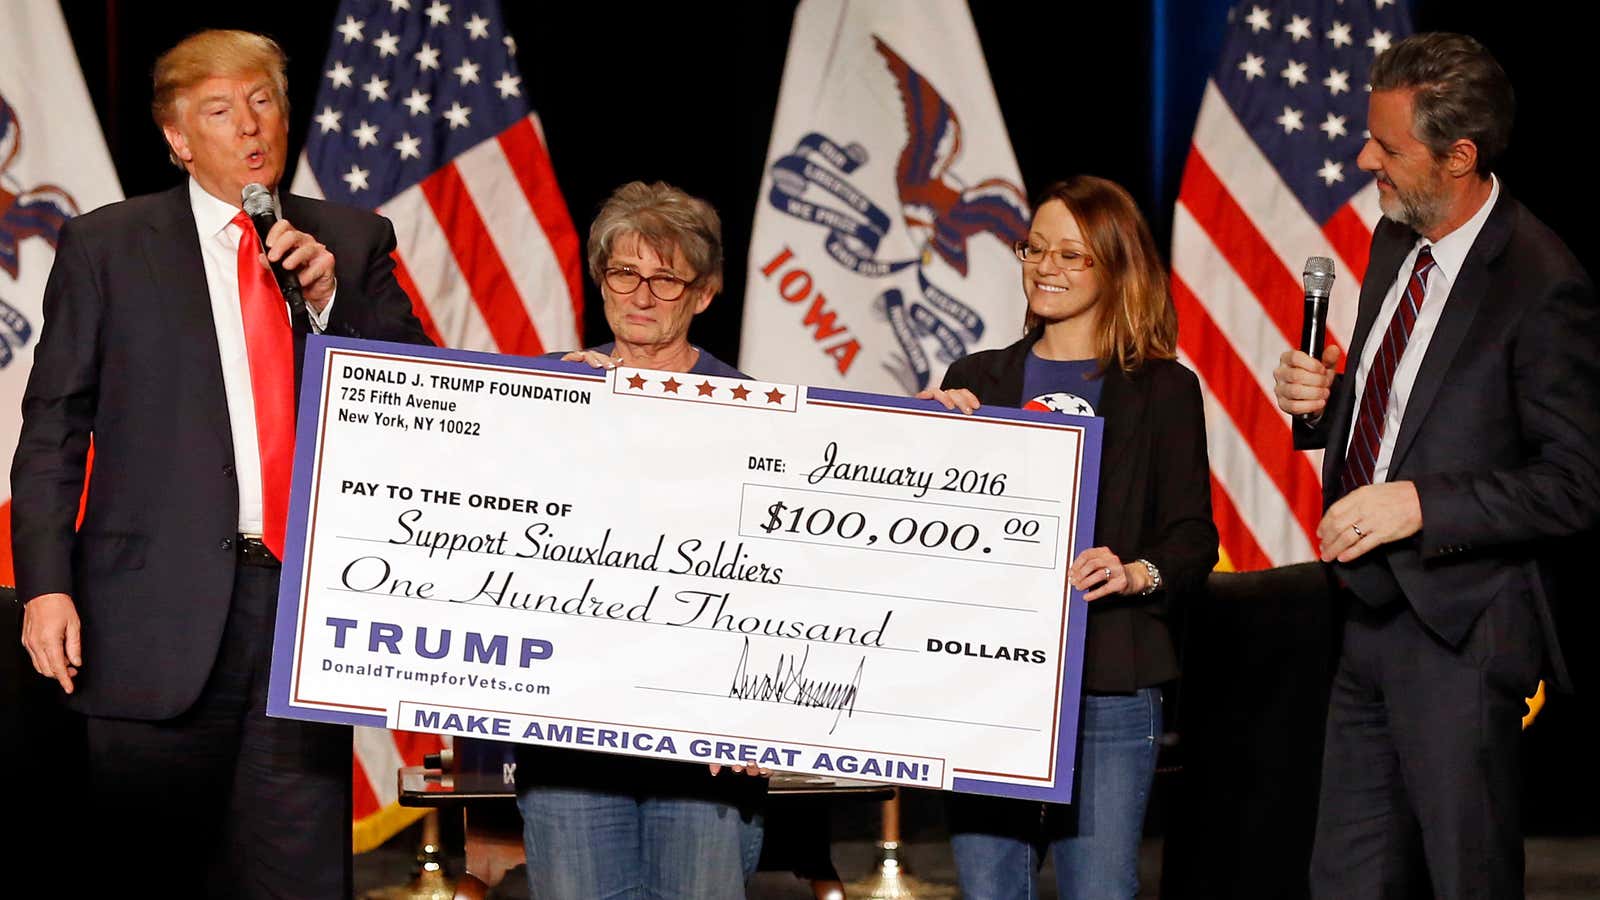 Donald Trump presents a check in Iowa the day before the 2016 Republican primary caucus there.